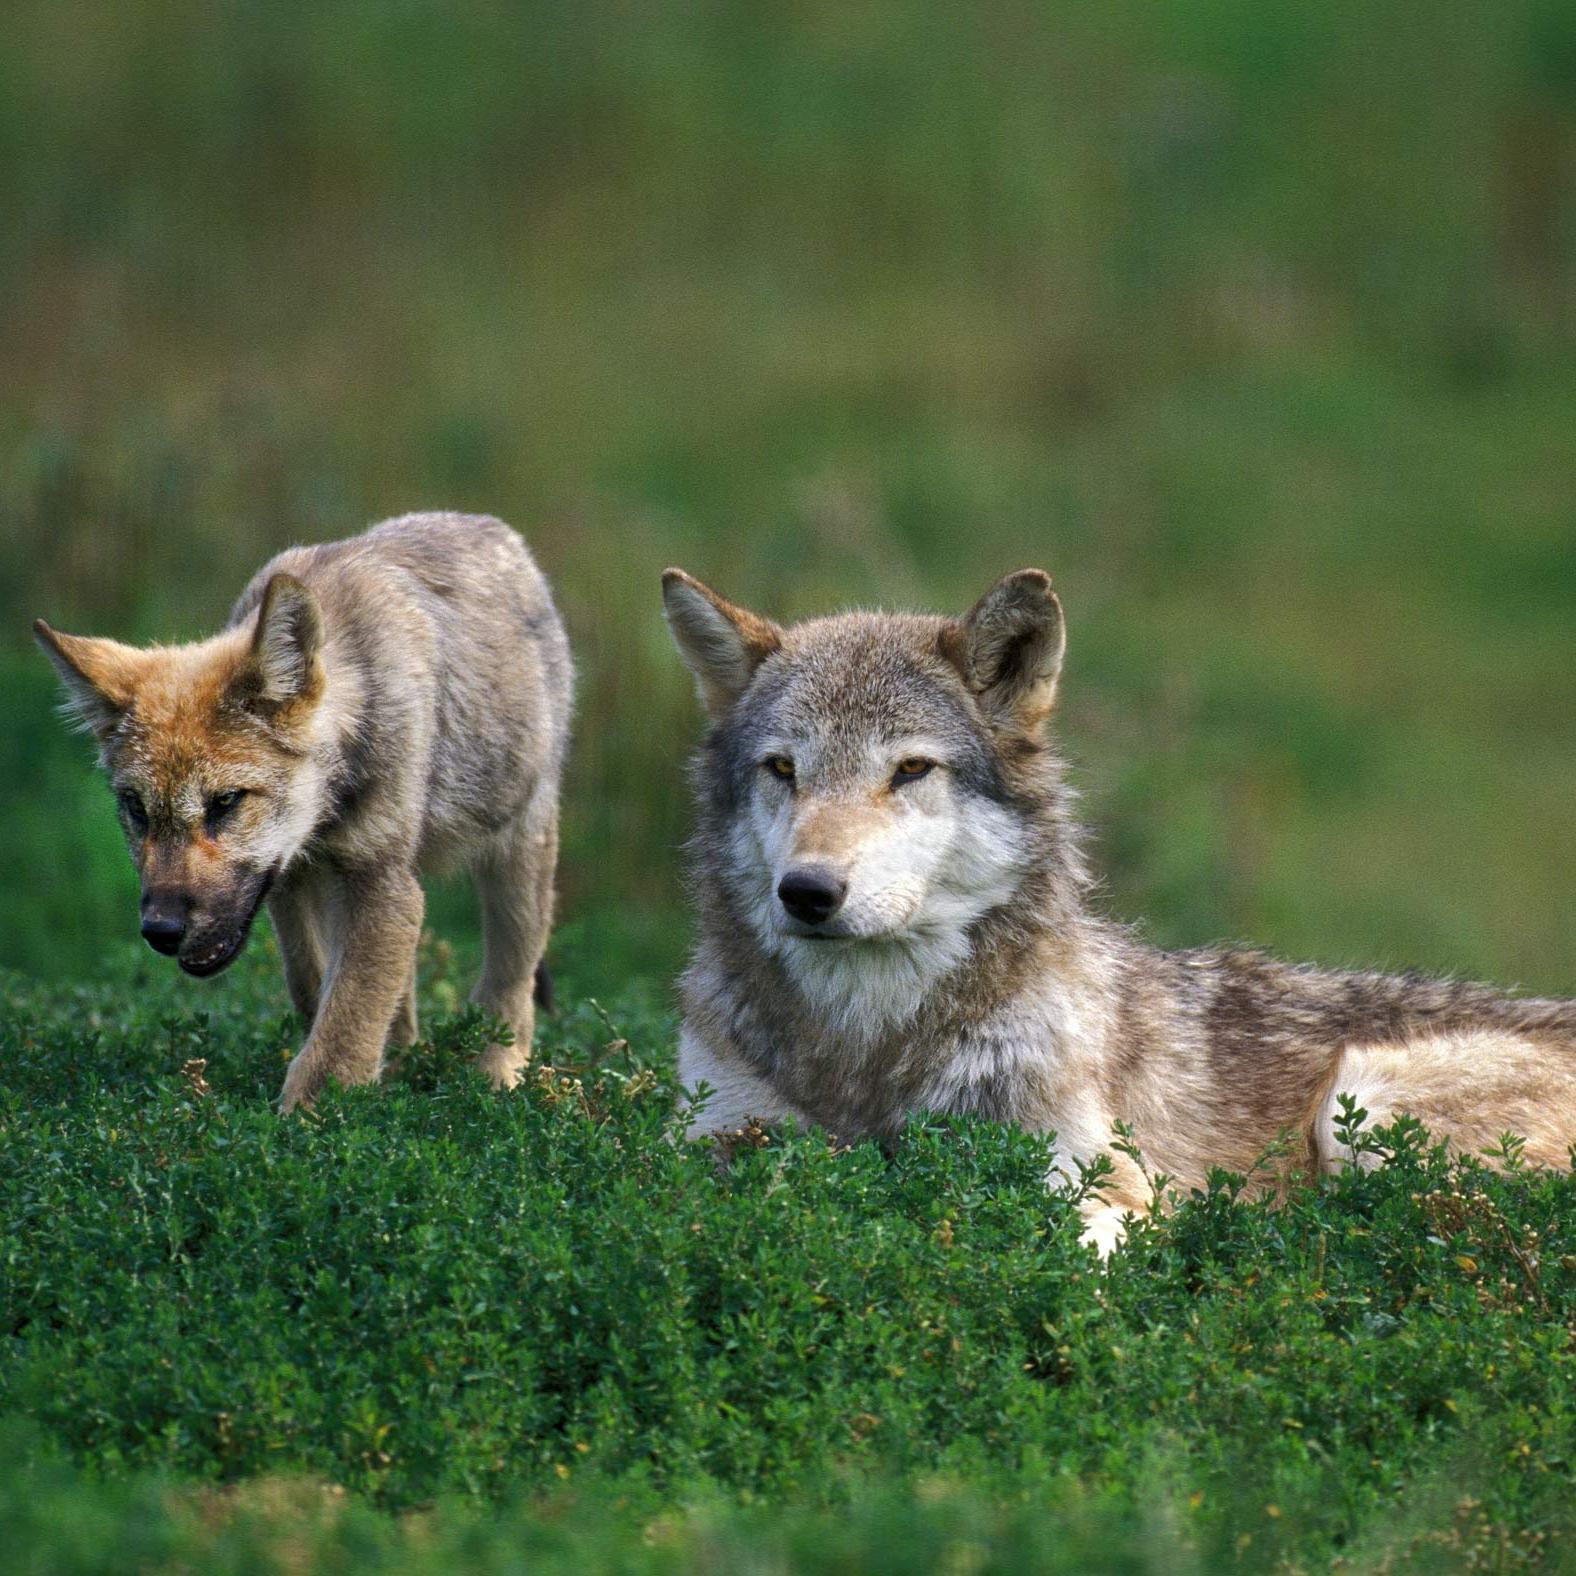 A mother wolf is lying in the grass with her cub standing next to her.